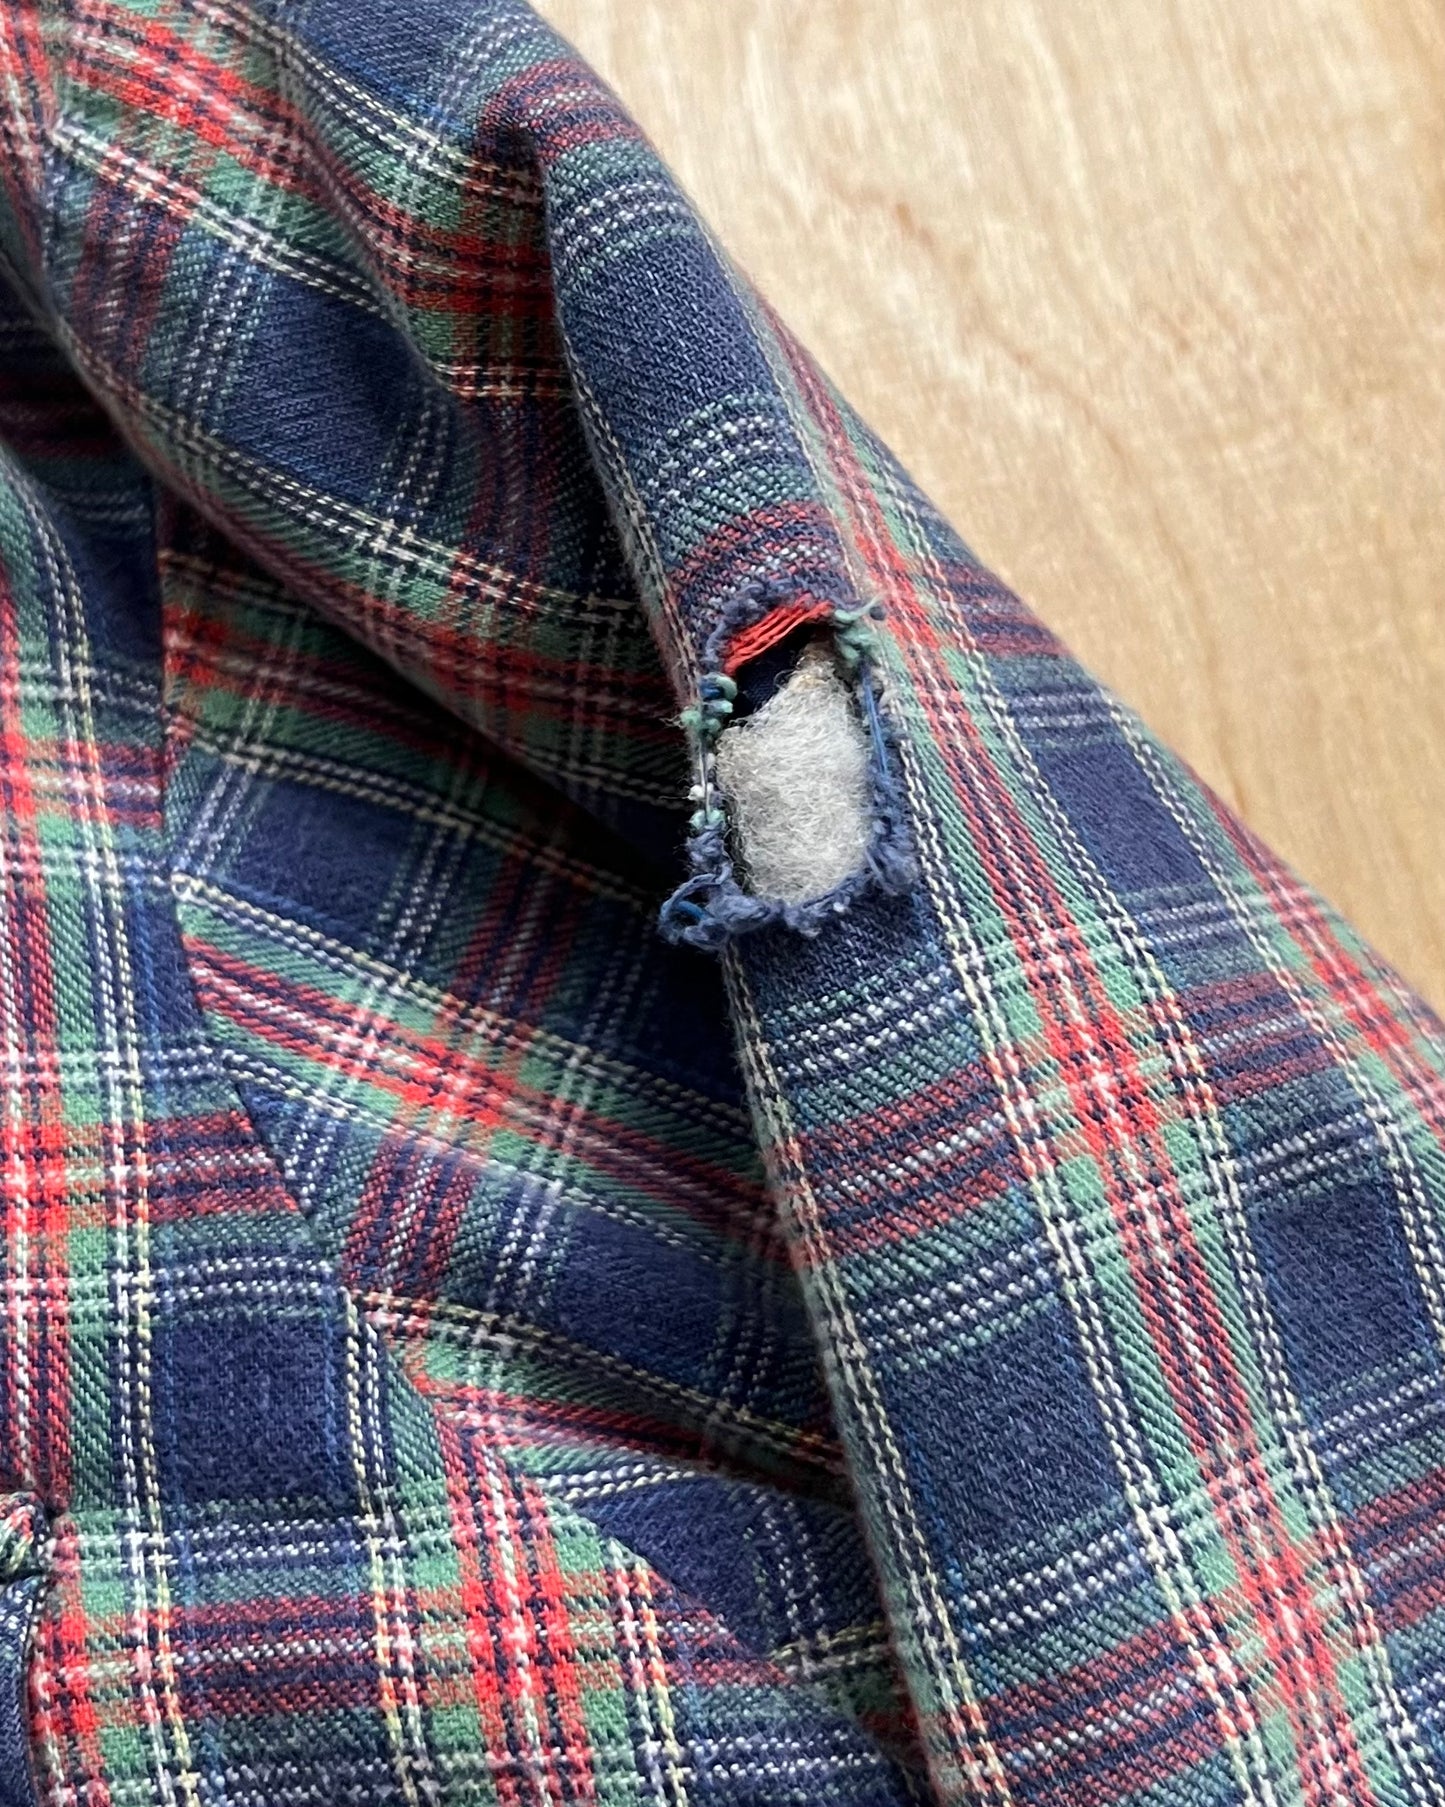 Vintage St Johns Bay Insulated Flannel